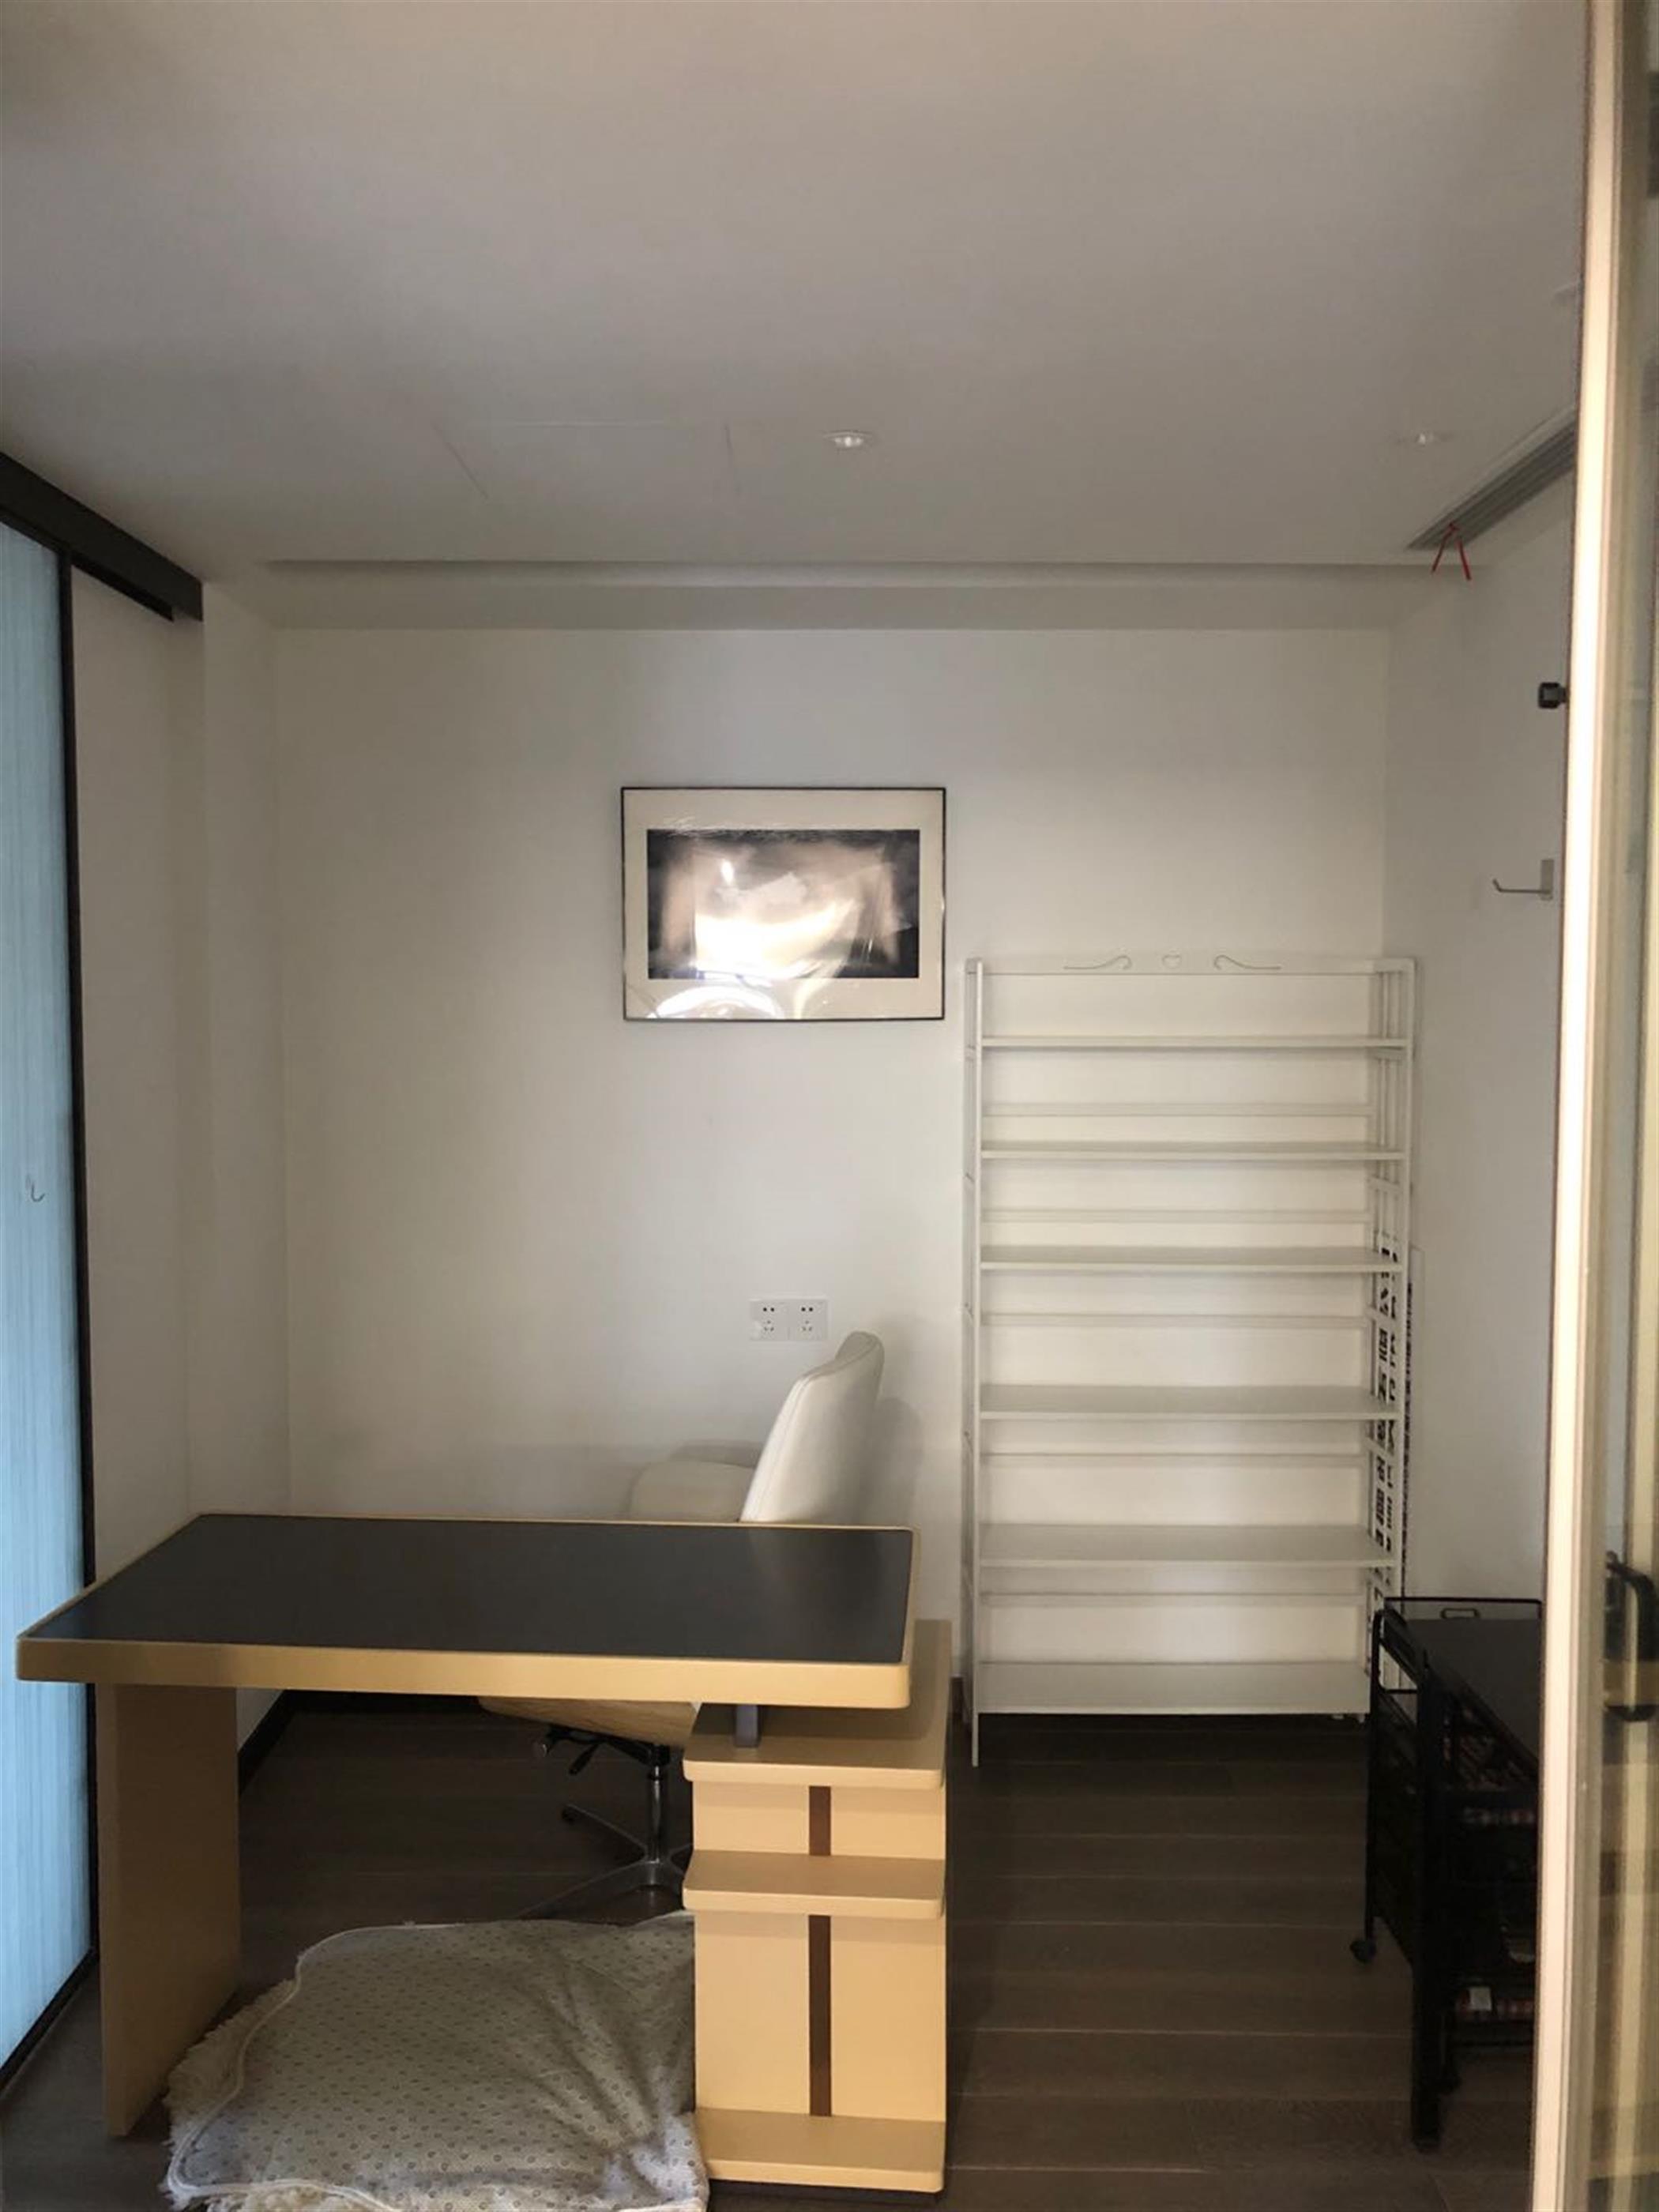 Office room New Spacious Convenient 3BR Gubei Apartment nr LN 2/15 for Rent in Shanghai